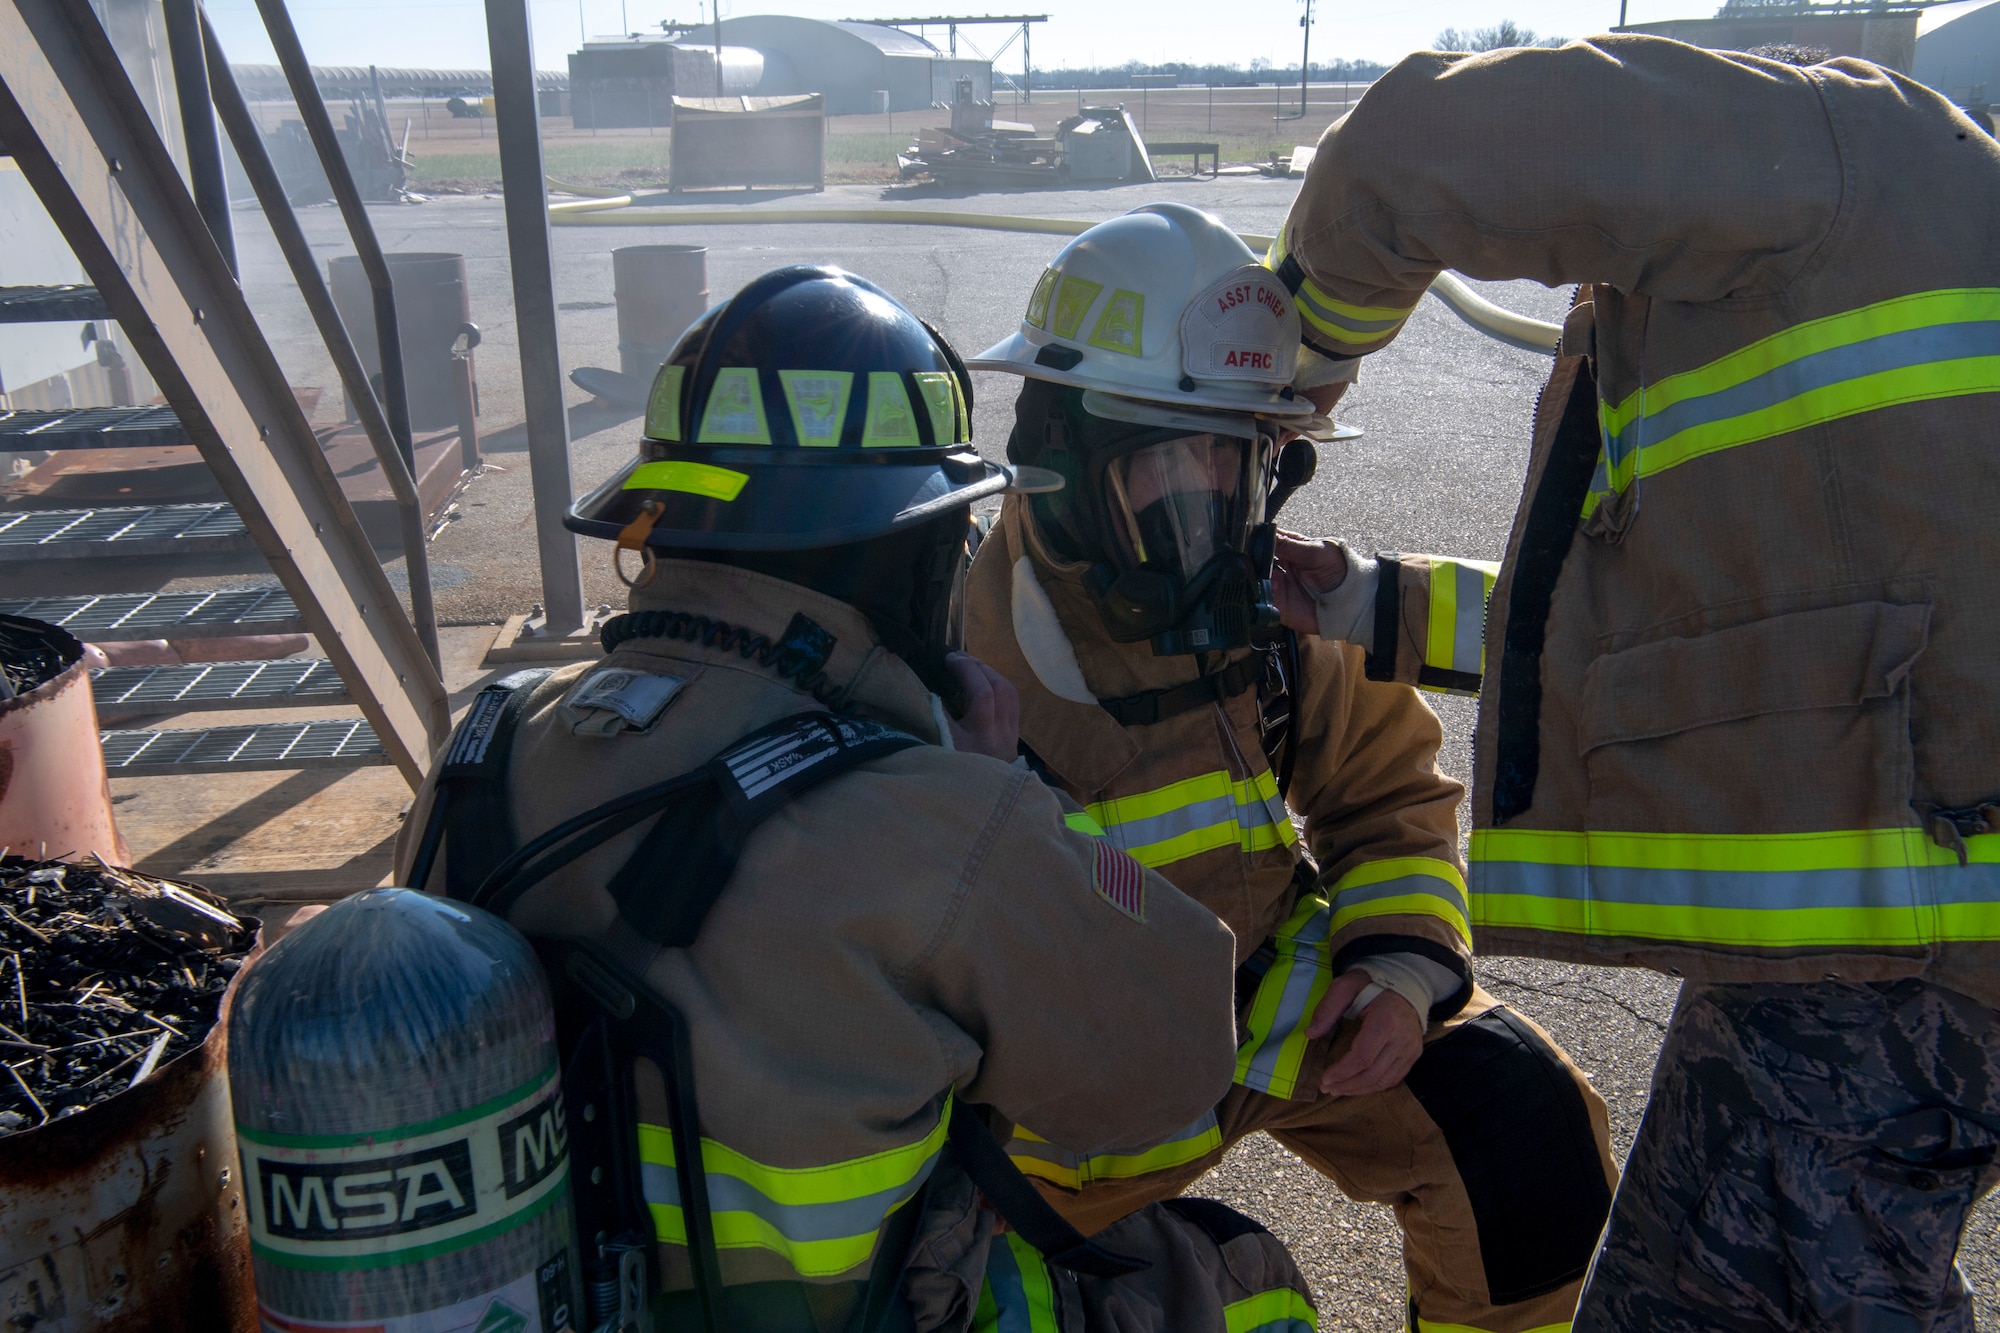 U.S. Air Force Senior Airman Kyler Rogers-McCoy and Airman 1st Class Ryann Baker, both 916th Civil Engineer Flight firefighters, simultaneously completes a buddy check on Lt. Col. Joseph Winchester, 916th Mission Support Group commander during a simulated live-fire training on Seymour Johnson Air Force Base, North Carolina, Jan. 9, 2020. Buddy checks are mandatory for any firefighter prior to making entry on any fire scene. (U.S. Air Force photo by Staff Sgt. Mary McKnight)